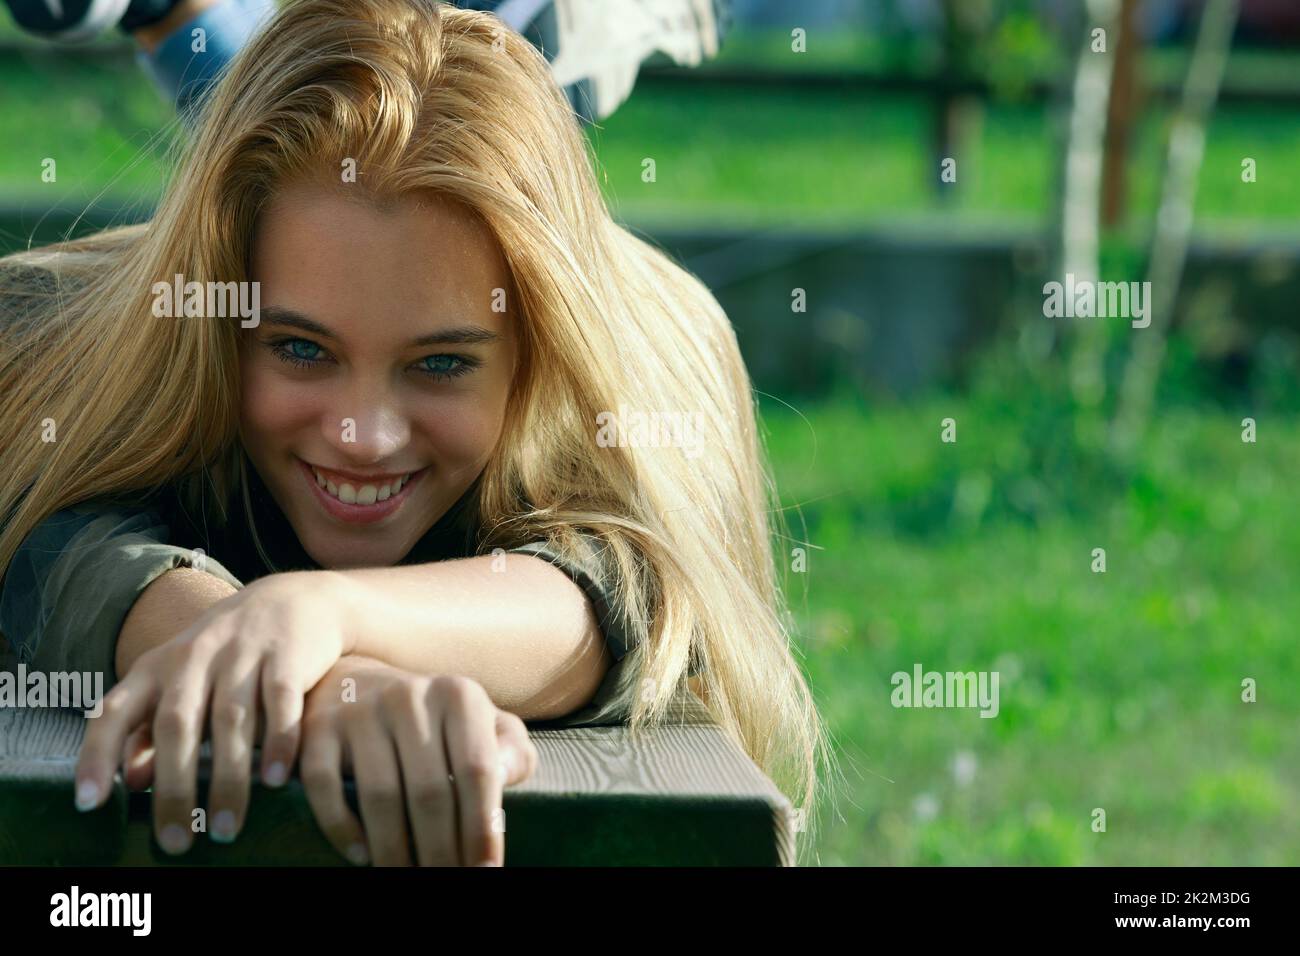 Cute young blond woman with a vivacious grin Stock Photo